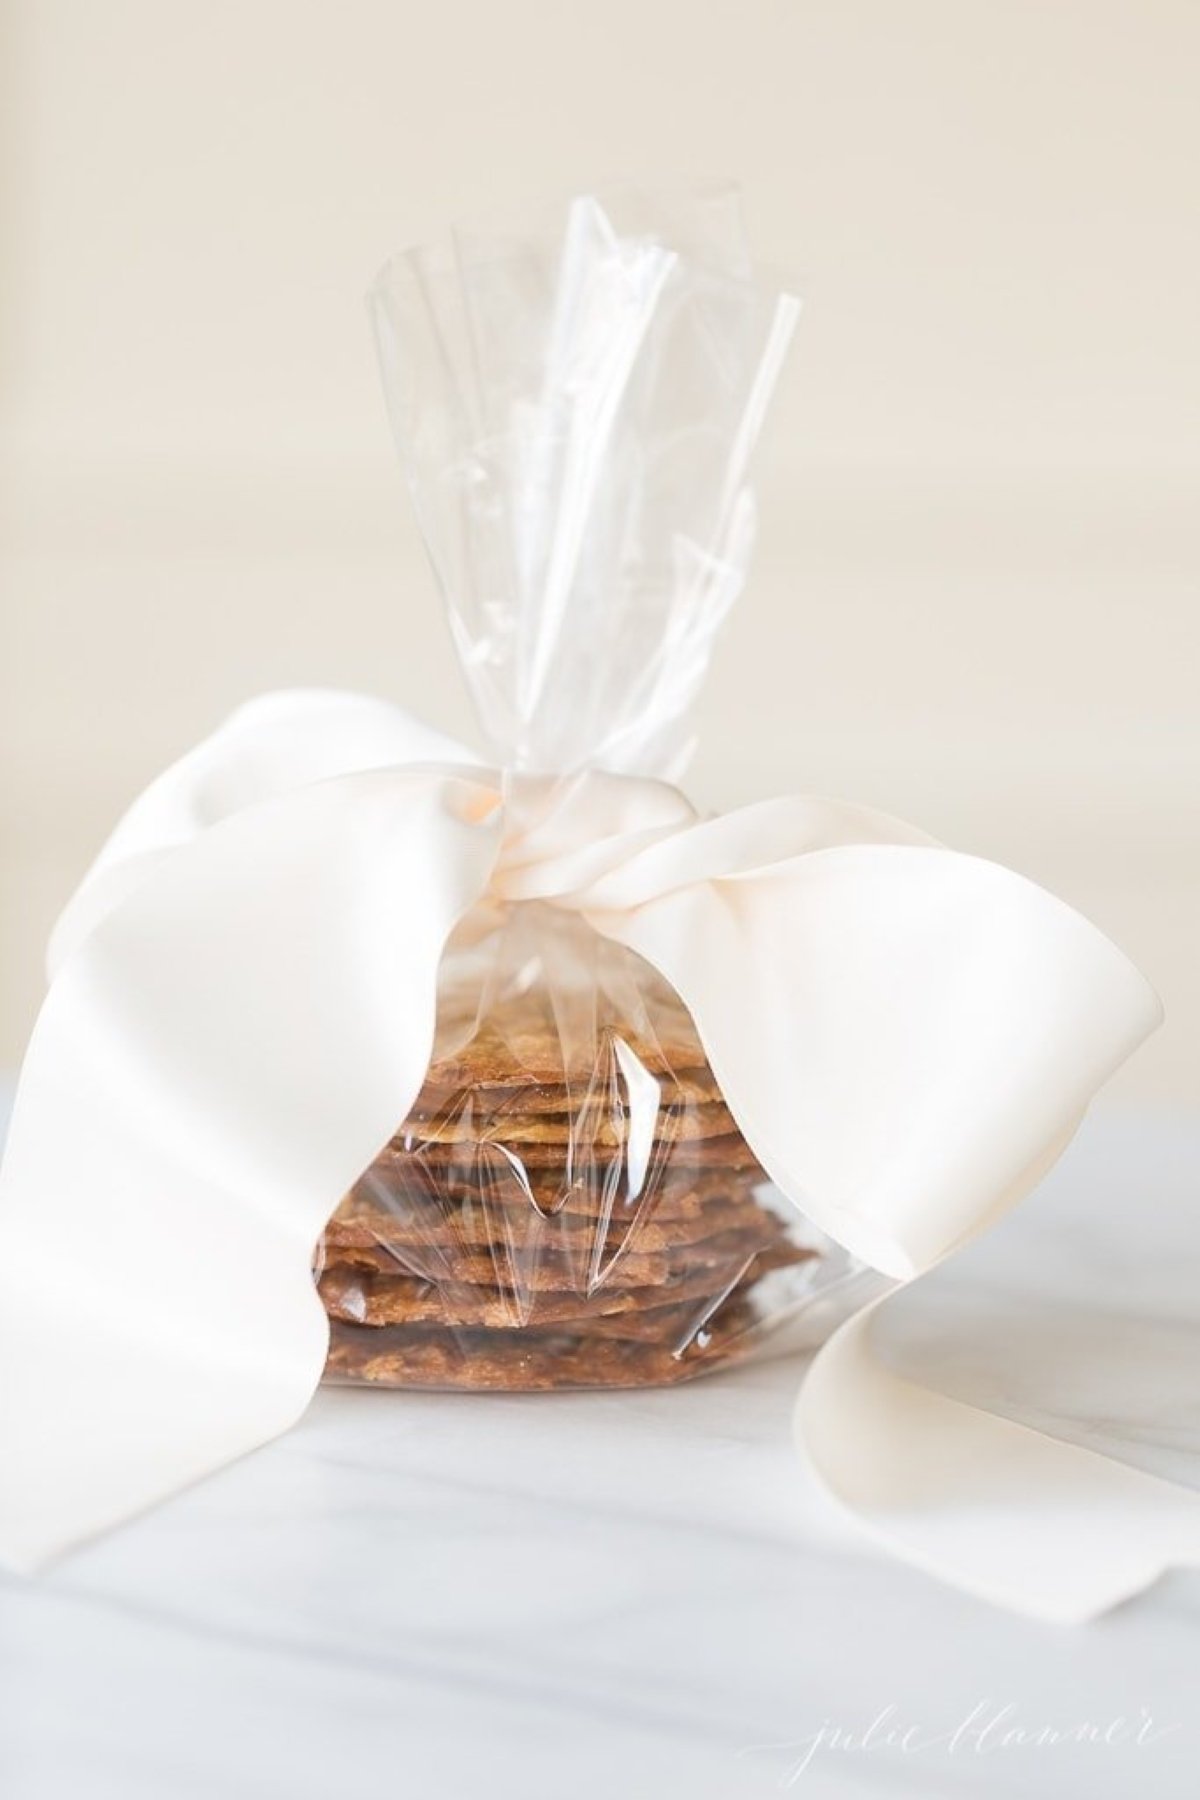 A stack of lace cookies in a cellophane bag, tied with a wide ivory bow.